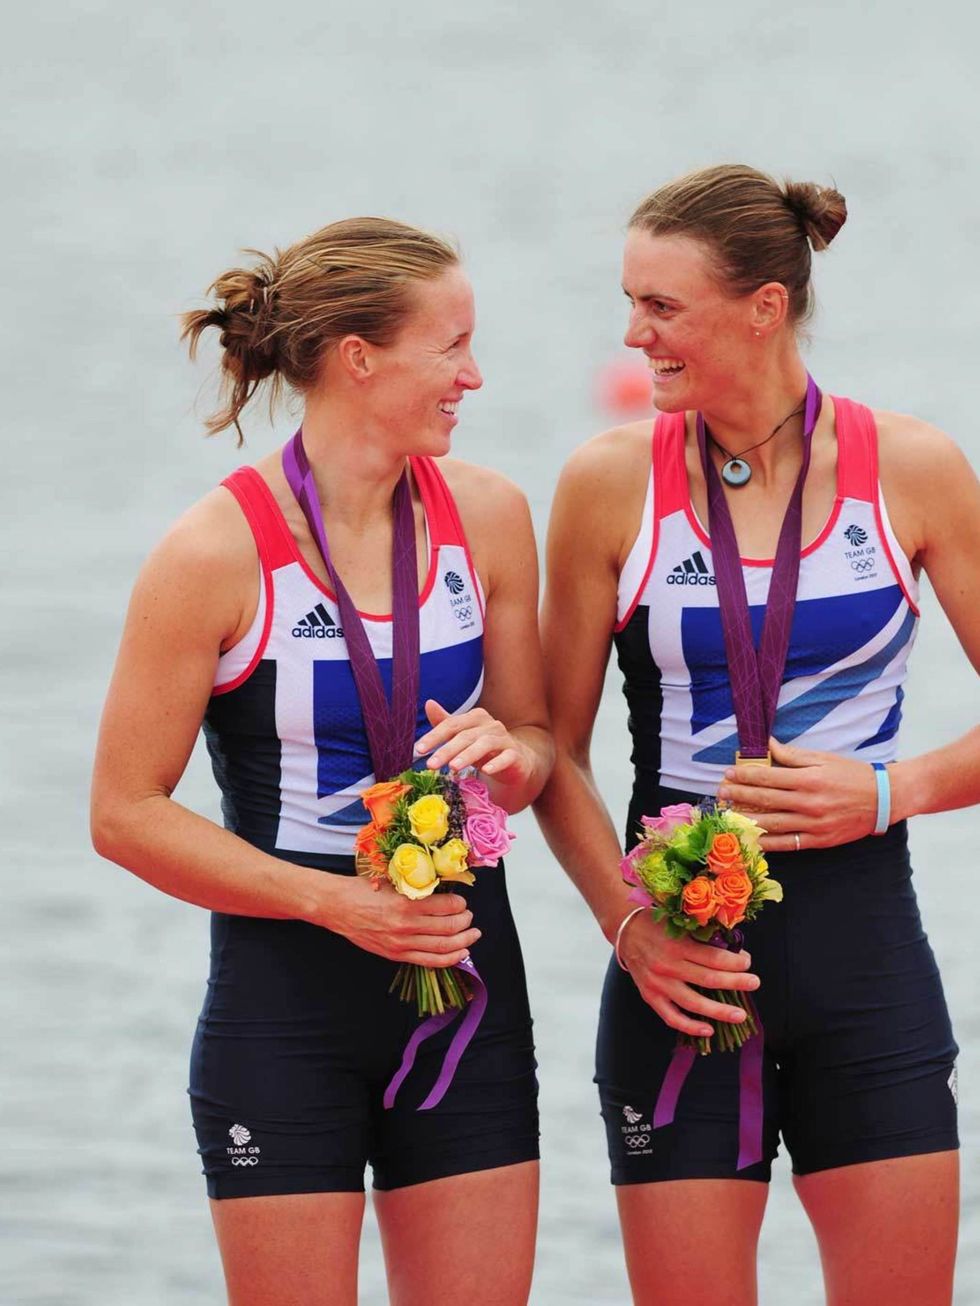 <p>Helen Glover and Heather Stanning wearing the <a href="http://www.elleuk.com/fashion/news/stella-takes-the-title">Stella McCartney Team GB Olympic Kit </a>celebrate their gold medals during the London Olympics, August 2012.</p>